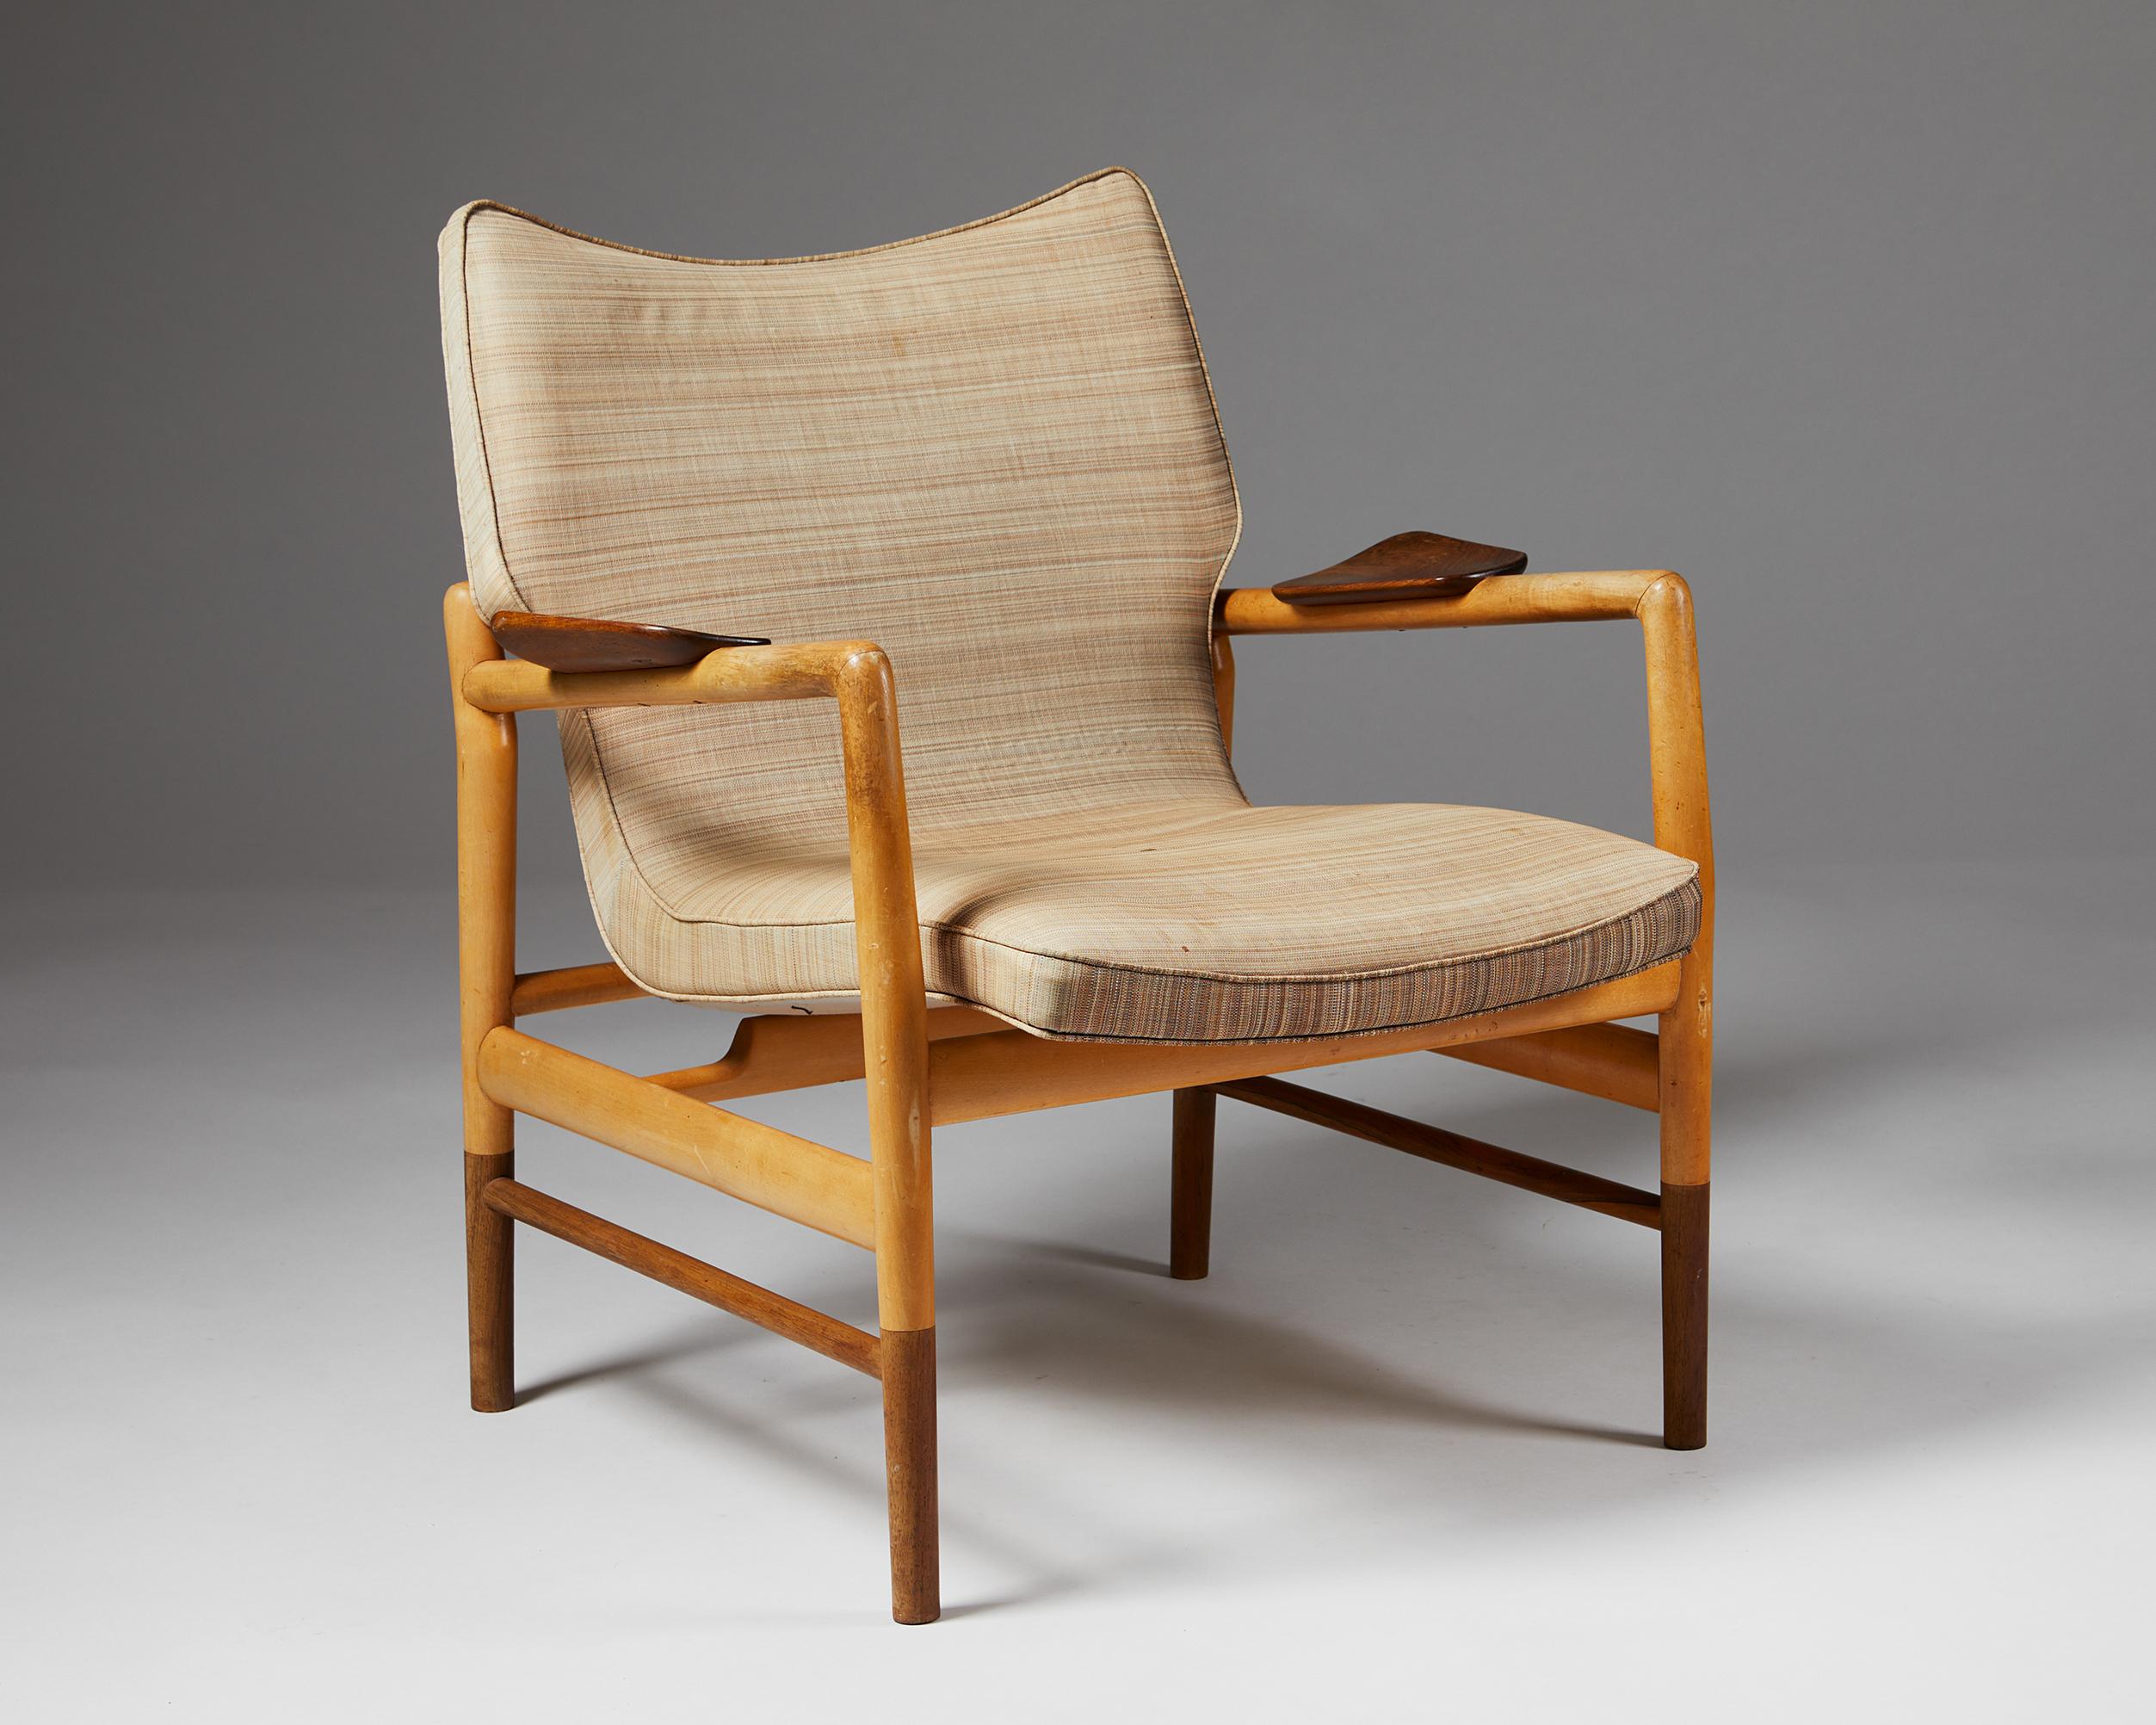 Easy chair designed by Ib Kofod-Larsen for Christensen & Larsen Cabinetmakers,
Denmark. 1949.
Maple, Brazilian rosewood with horsehair fabric.

Provenance: Percy von Halling-Koch, hence by descent in the family.
Model presented at The